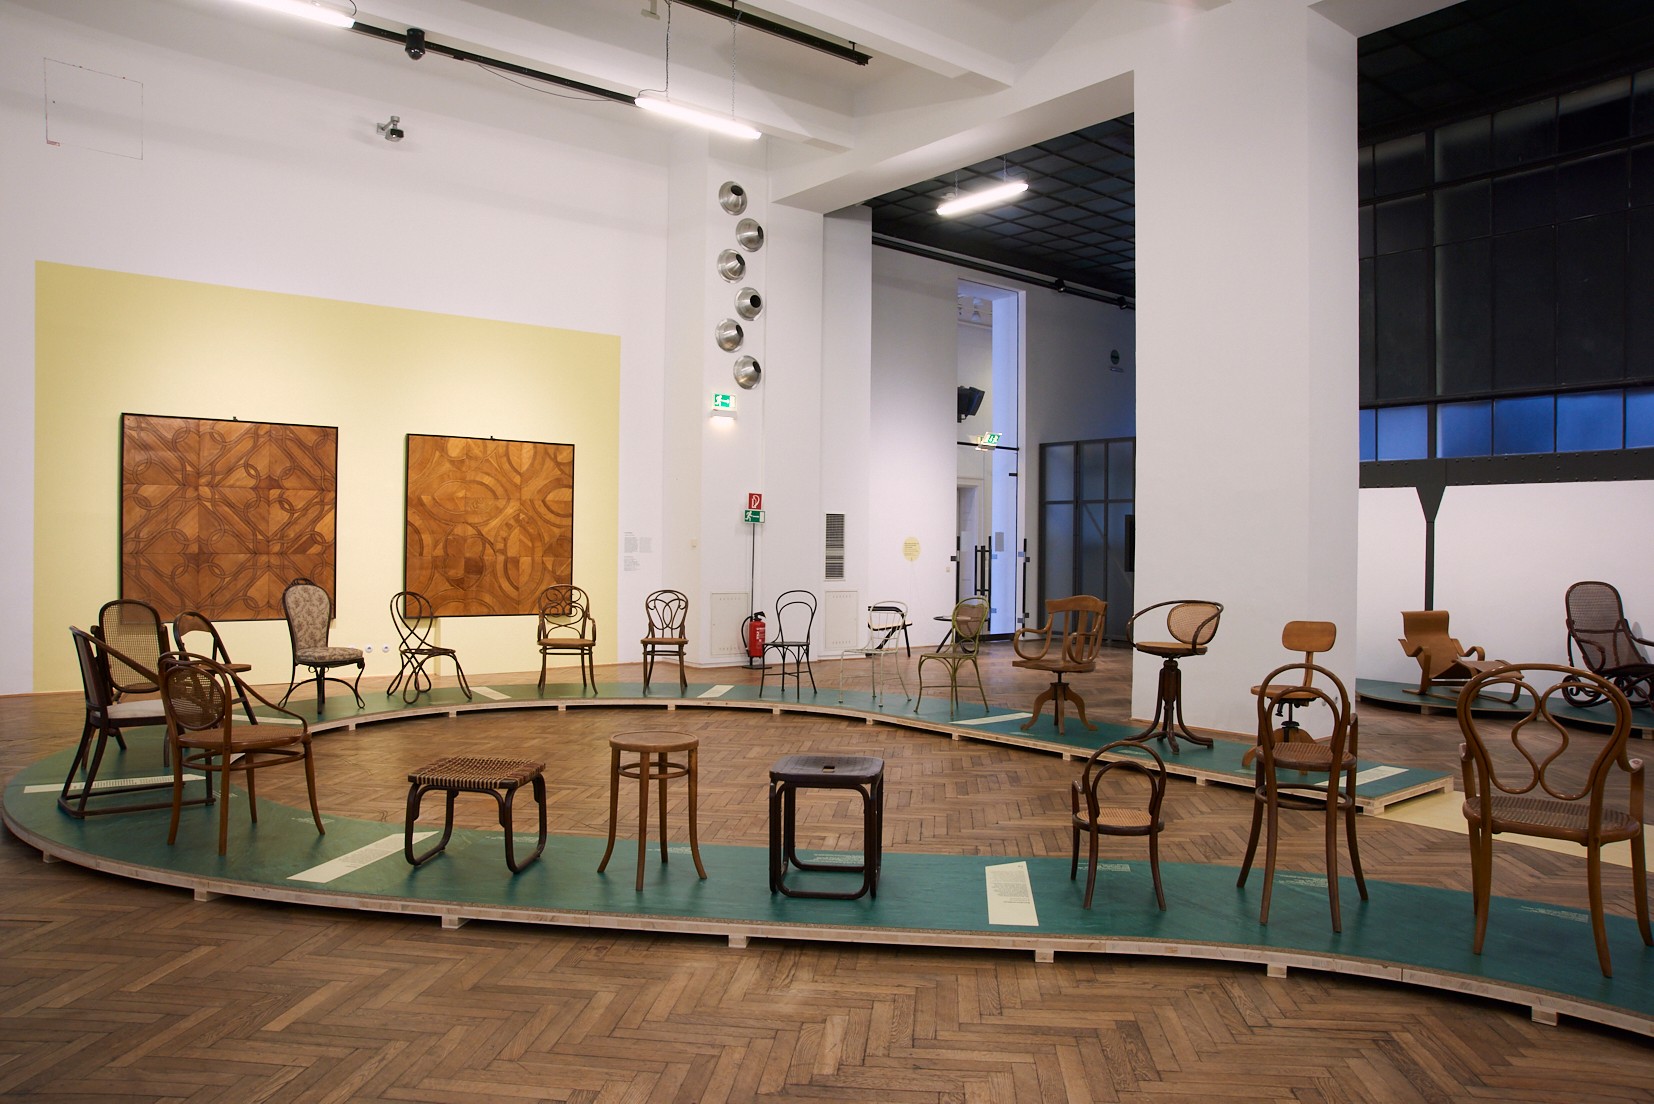 <BODY><div>MAK Exhibition View, 2019</div><div>BENTWOOD AND BEYOND</div><div>Thonet and Modern Furniture Design</div><div>MAK Exhibition Hall</div><div>© MAK/Georg Mayer</div></BODY>